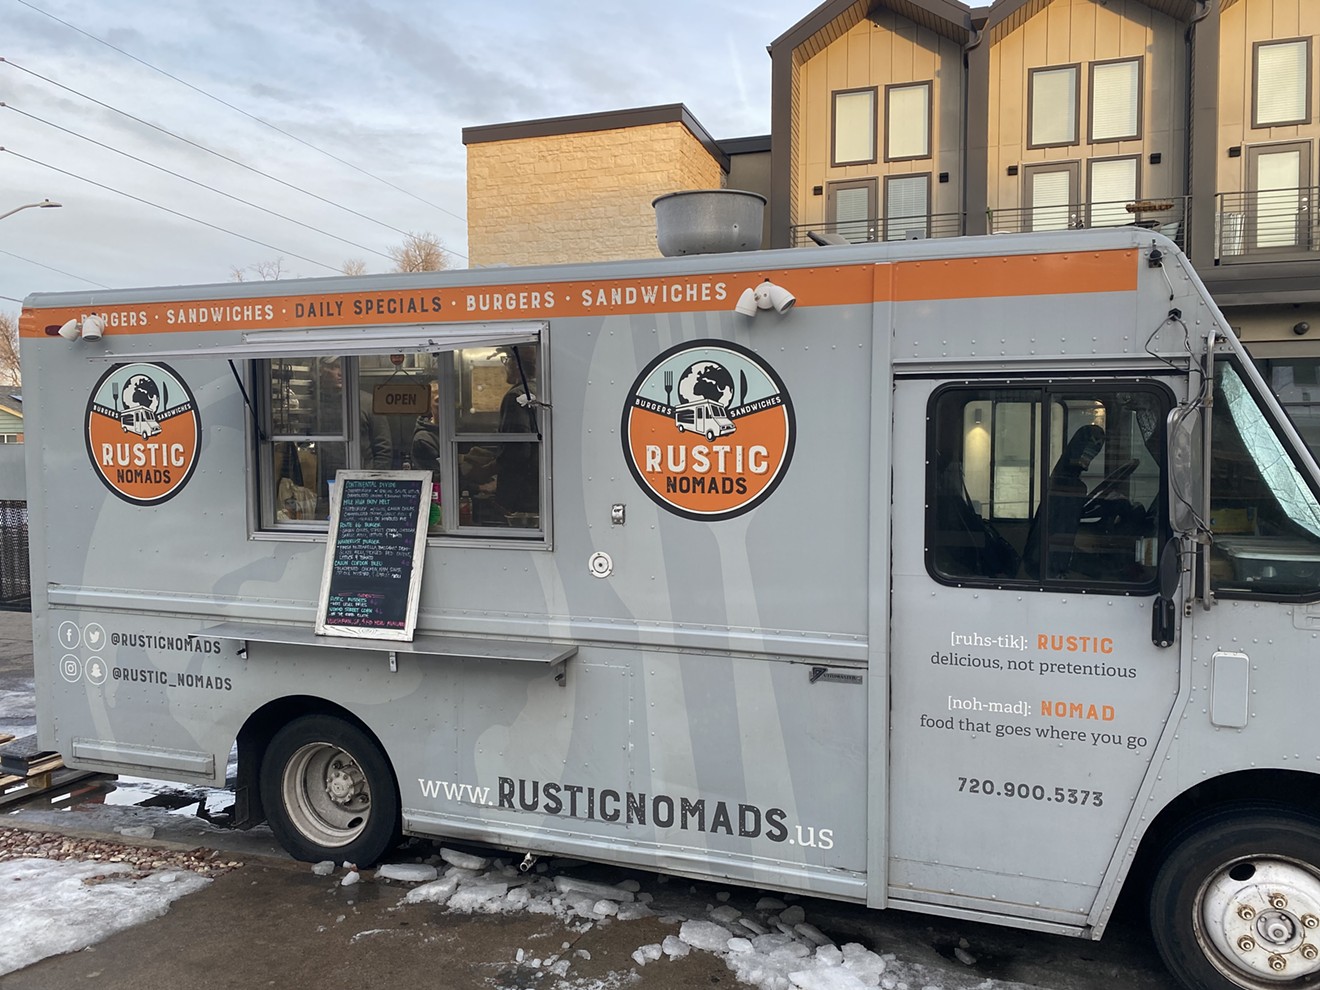 Look out for the Rustic Nomads food truck.